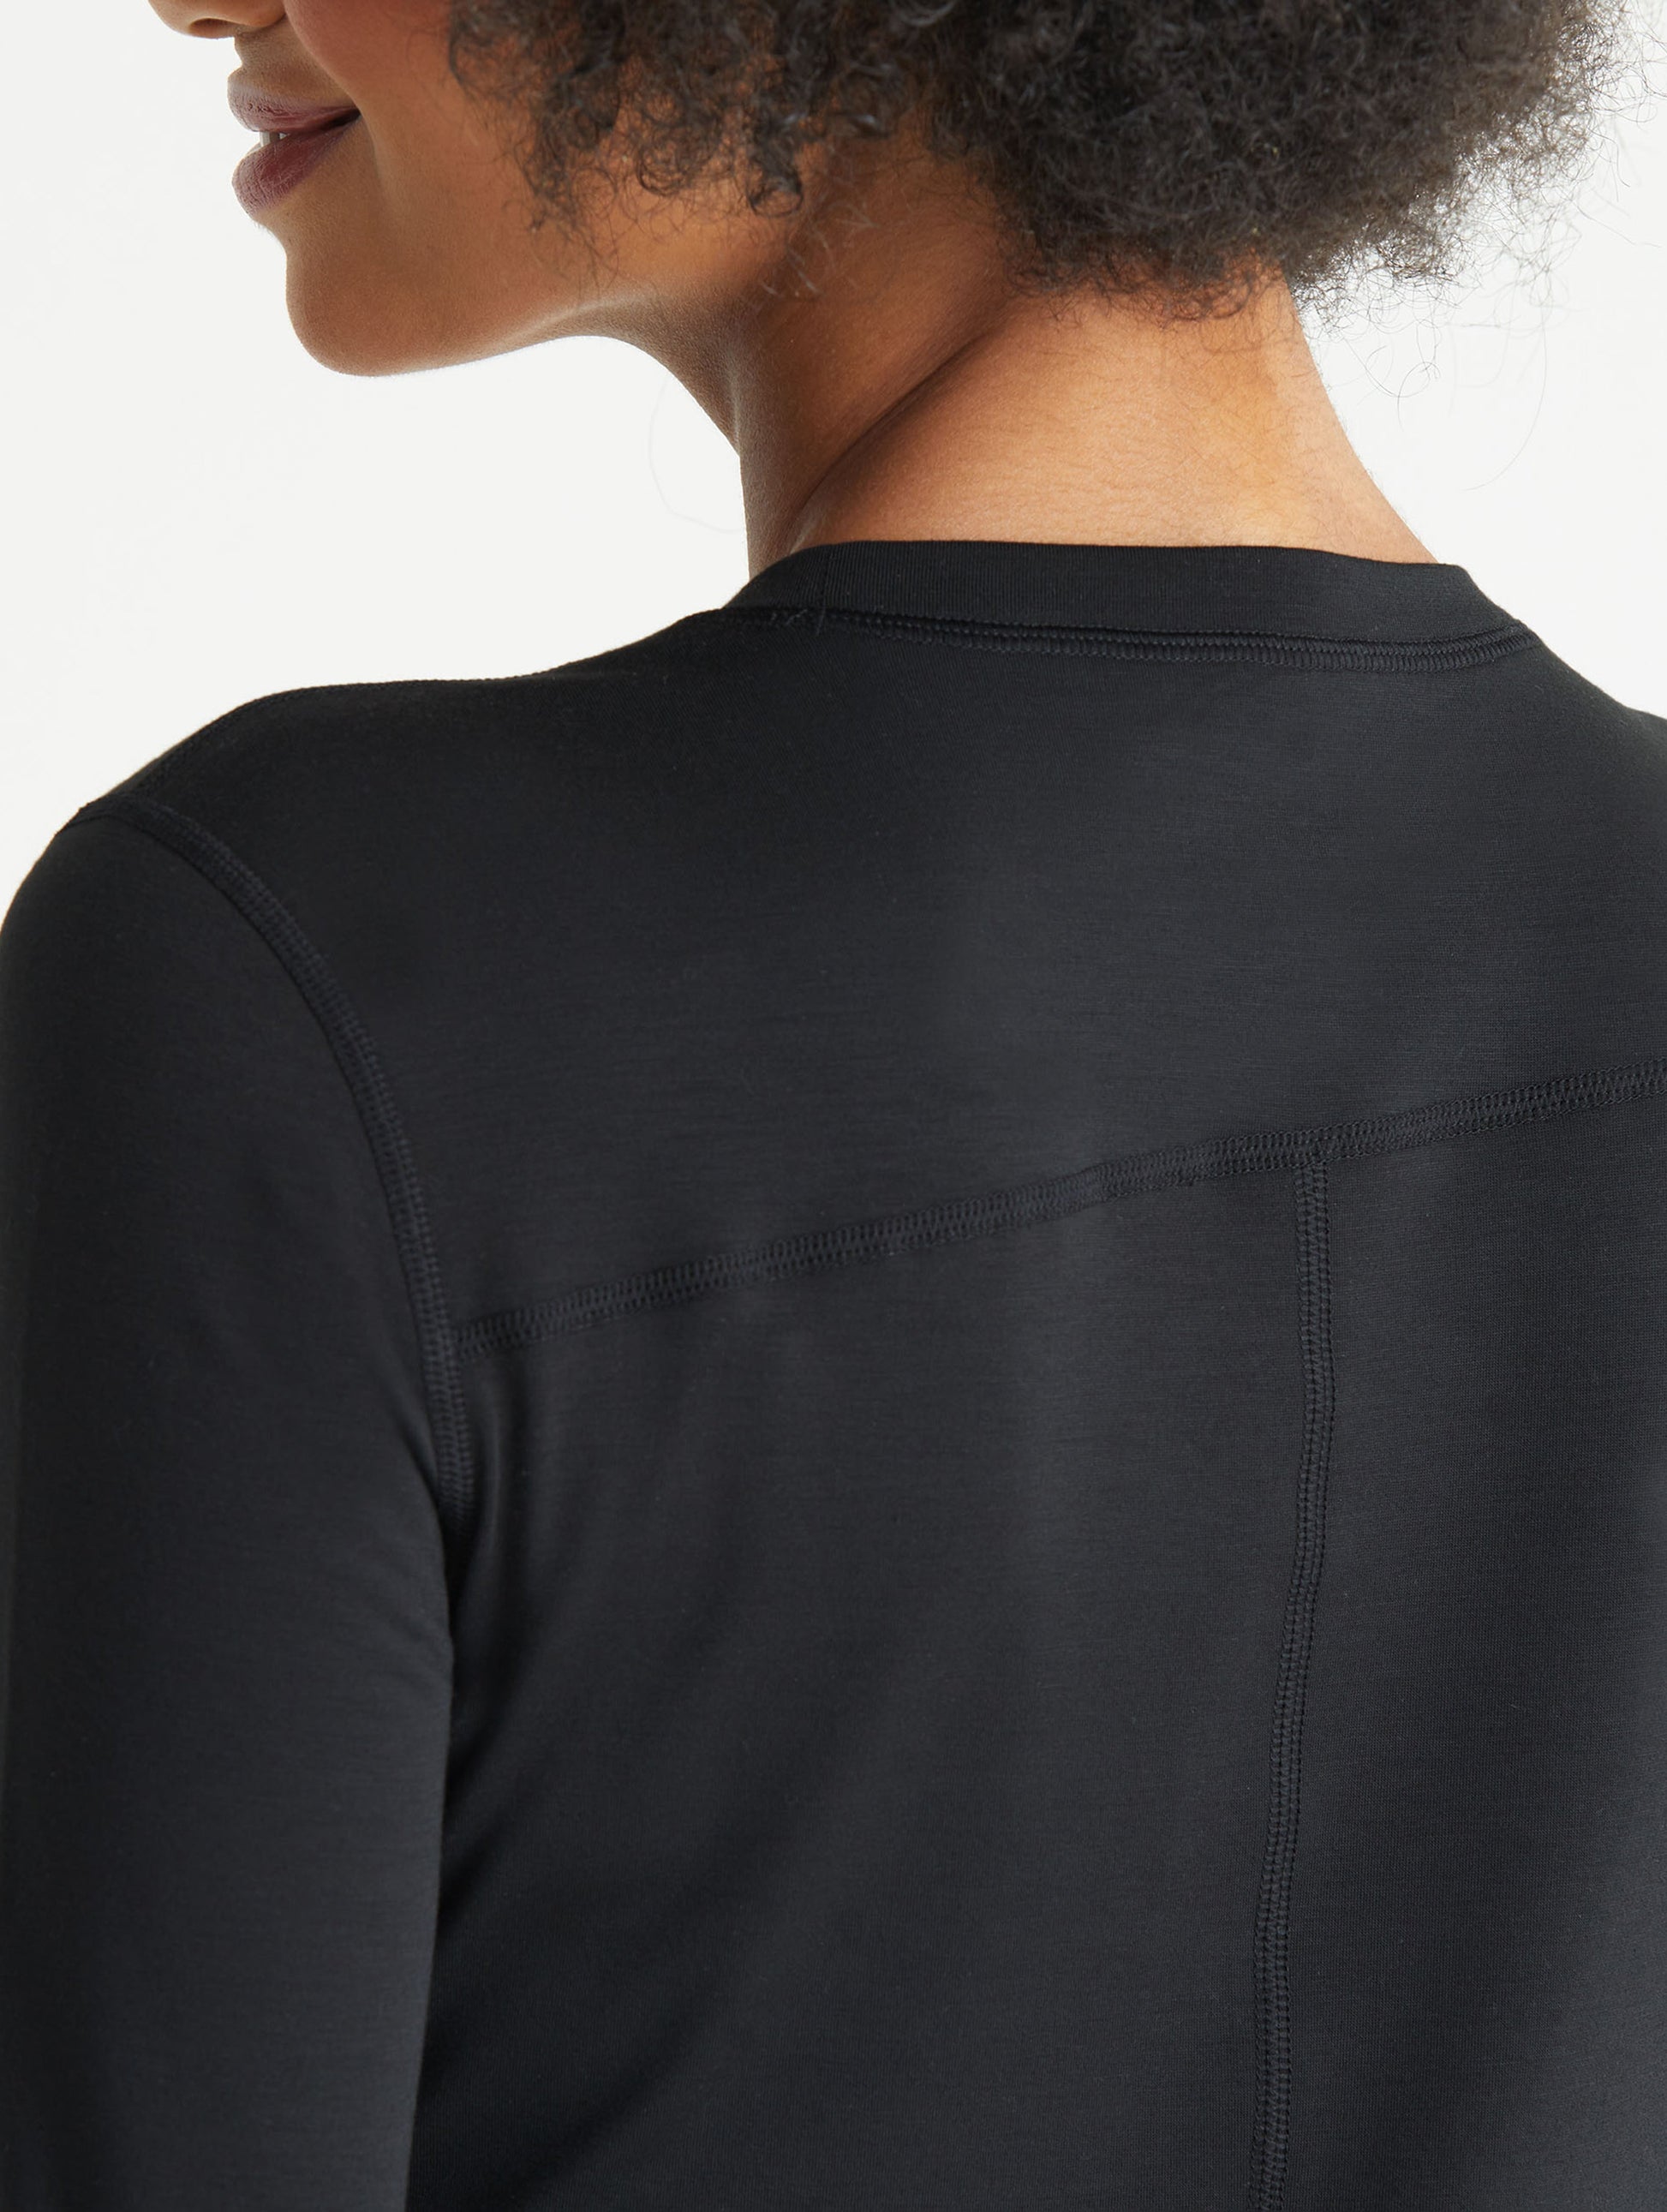 base layer shirt for women from Aether Apparel